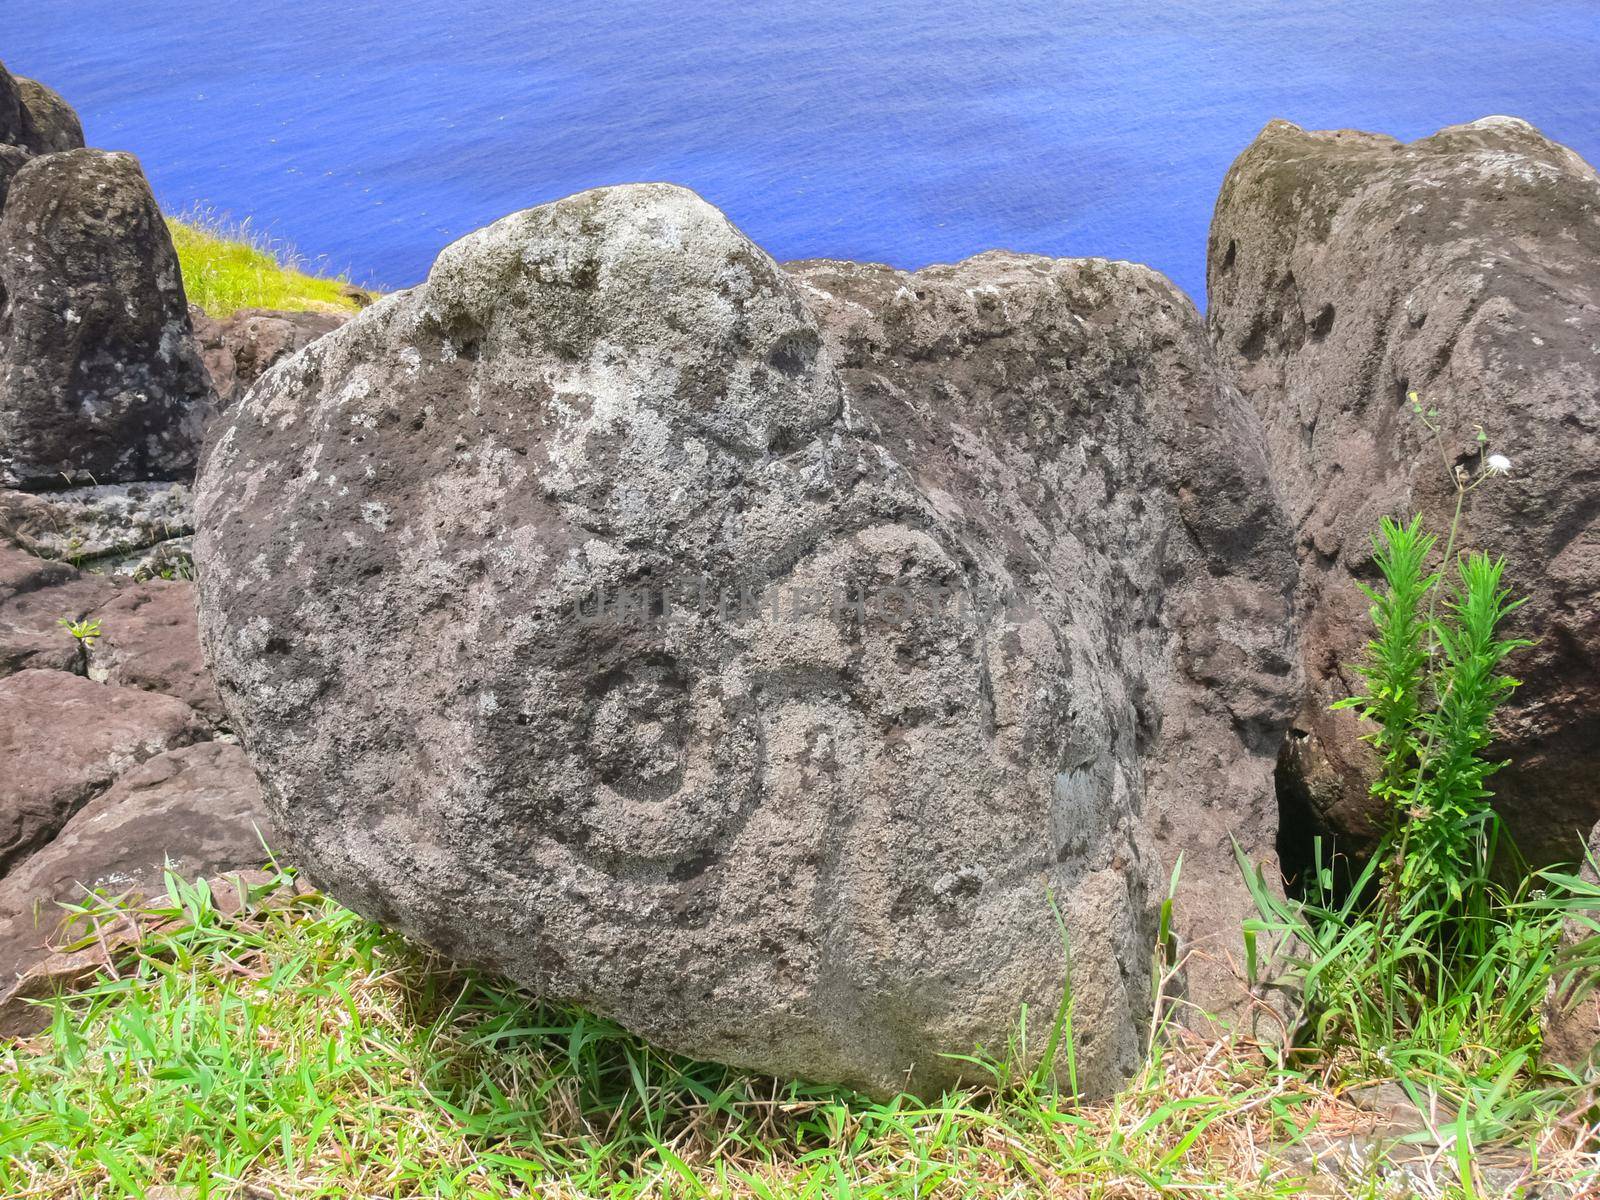 Rocks with rock engraving. Easter Island, traces of ancient culture.